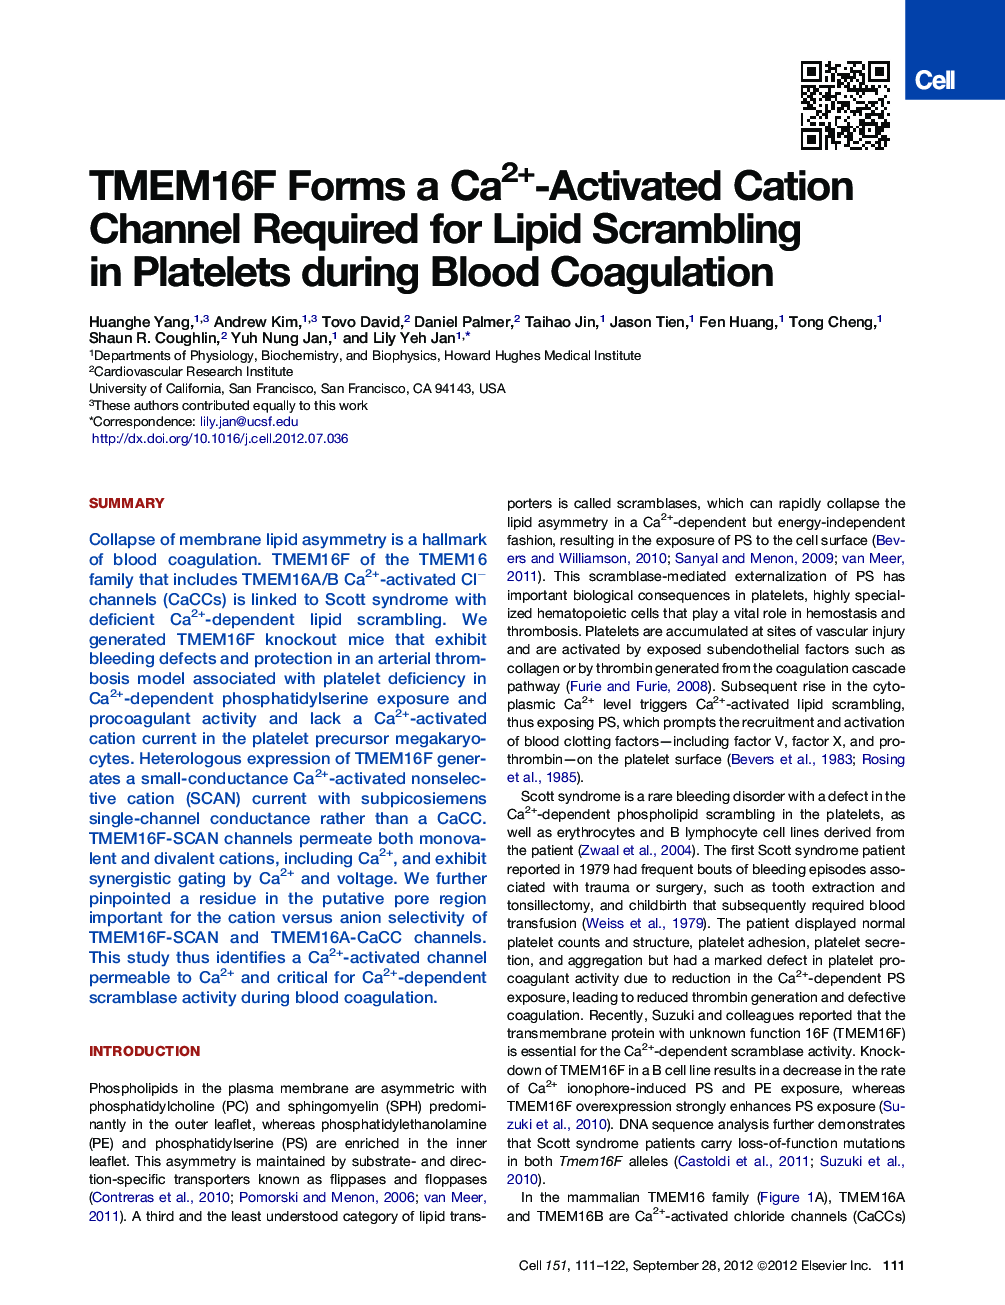 TMEM16F Forms a Ca2+-Activated Cation Channel Required for Lipid Scrambling in Platelets during Blood Coagulation